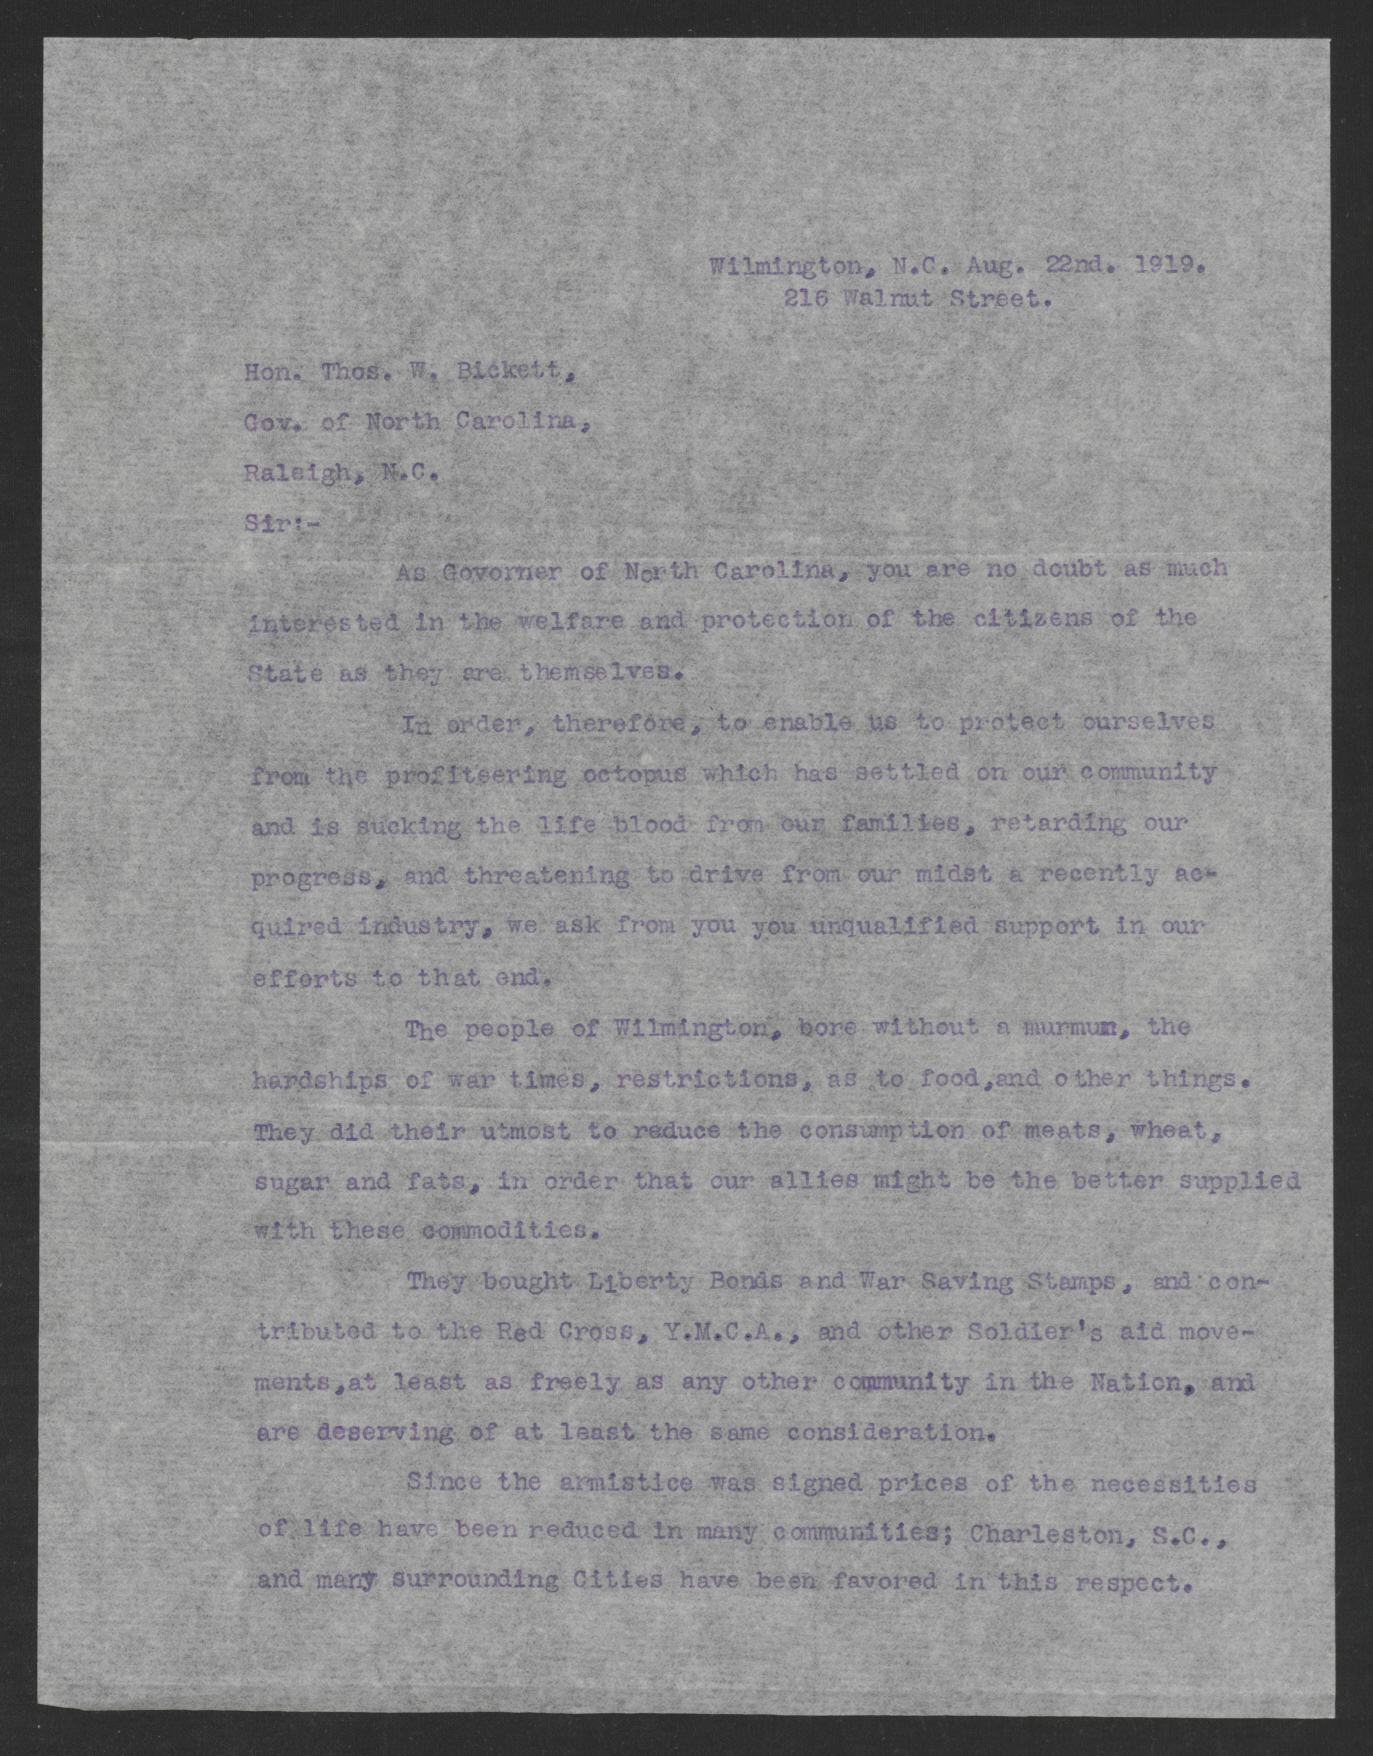 Letter from Citizens of Wilmington to Thomas W. Bickett, August 22, 1919, page 1